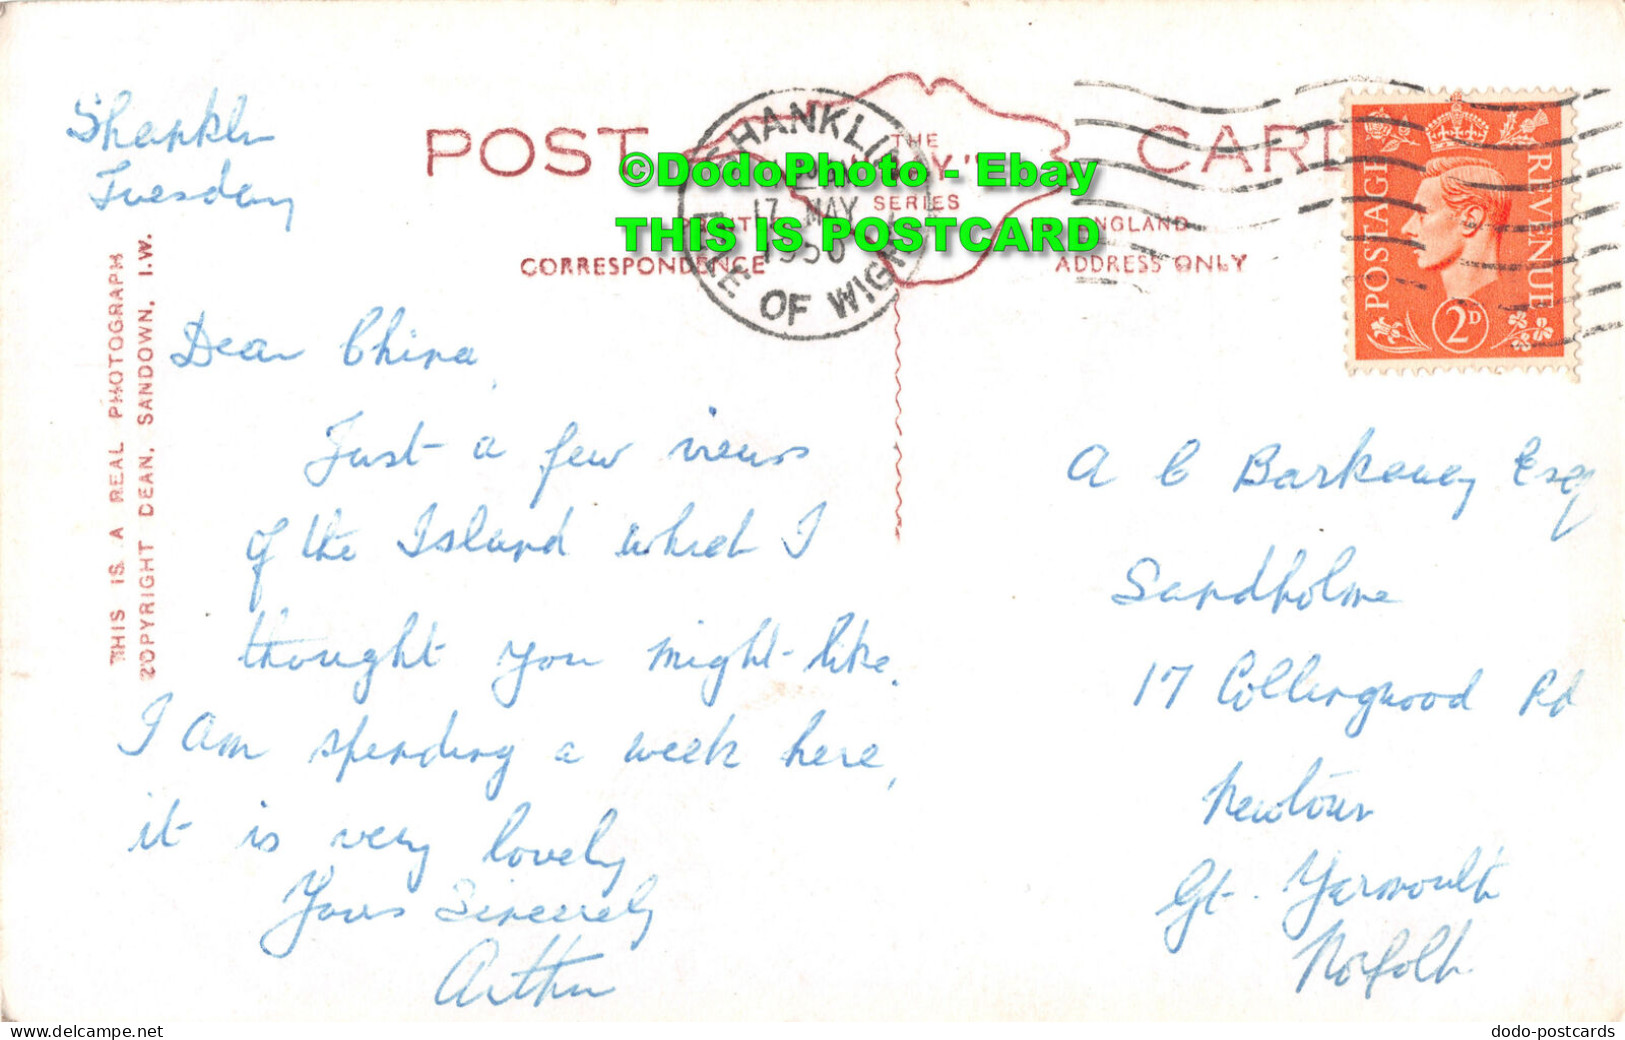 R418583 Isle Of Wight. D. 958. RP. Dean. The Bay Series. 1950. Multi View - World